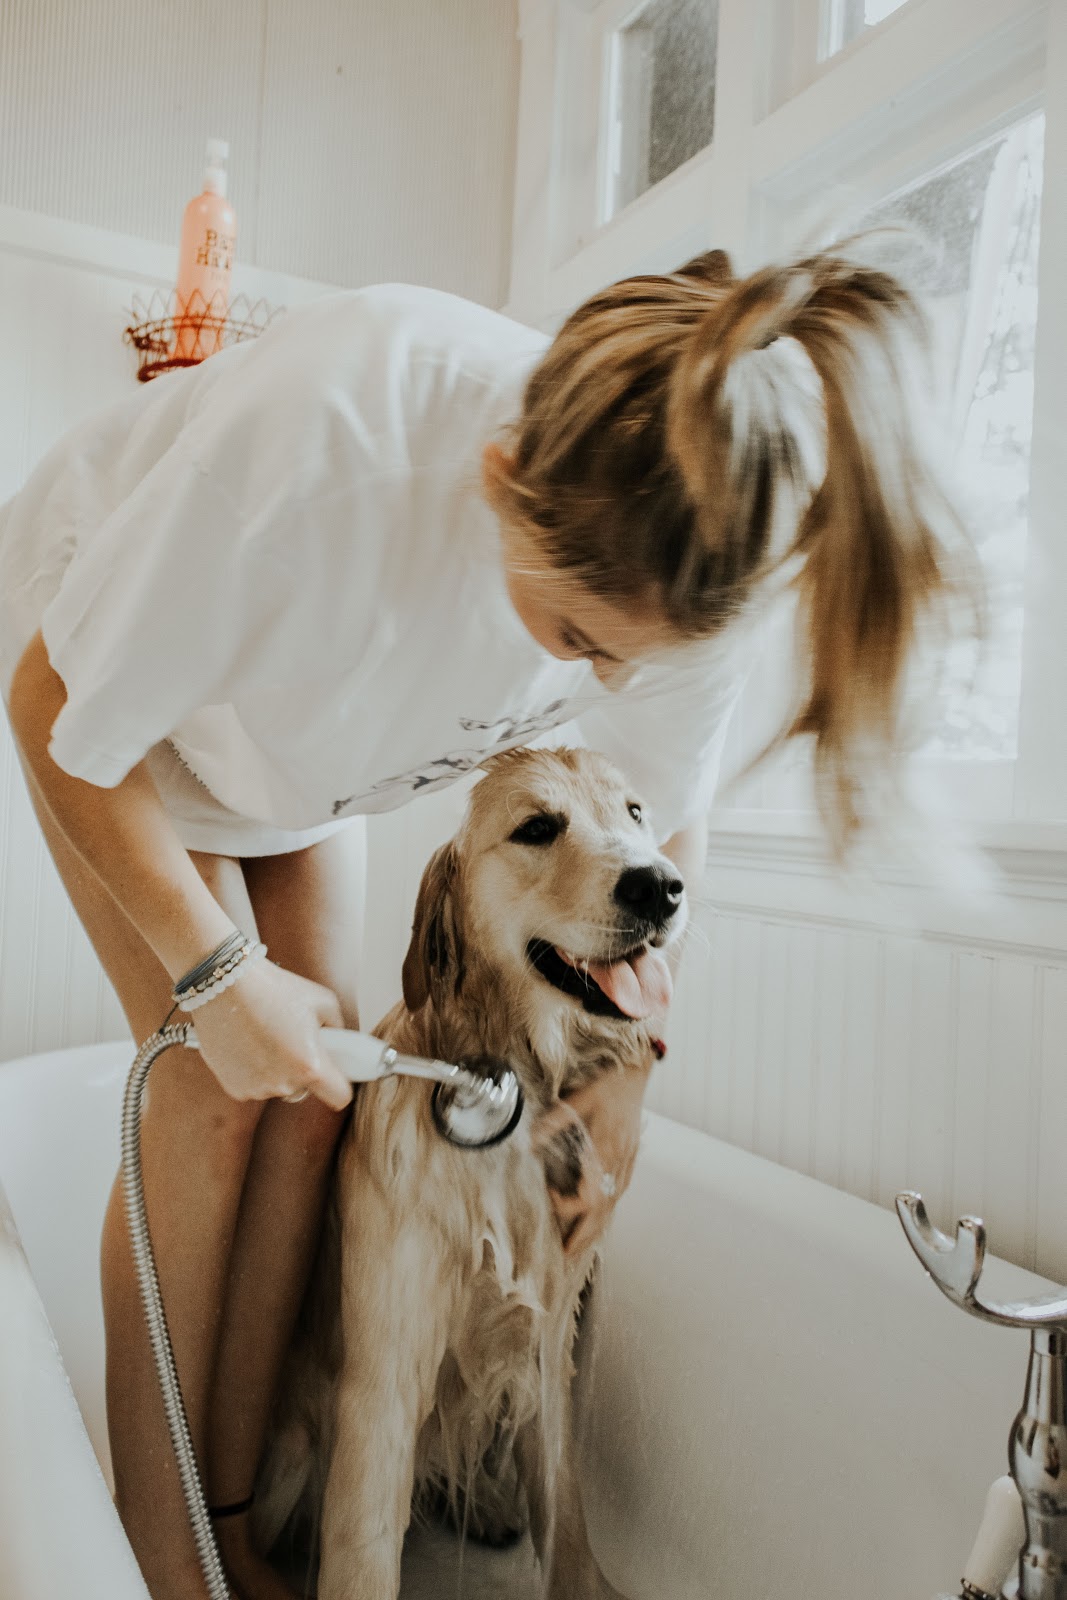 Dog Being Bathed by Blond Girl in Tub